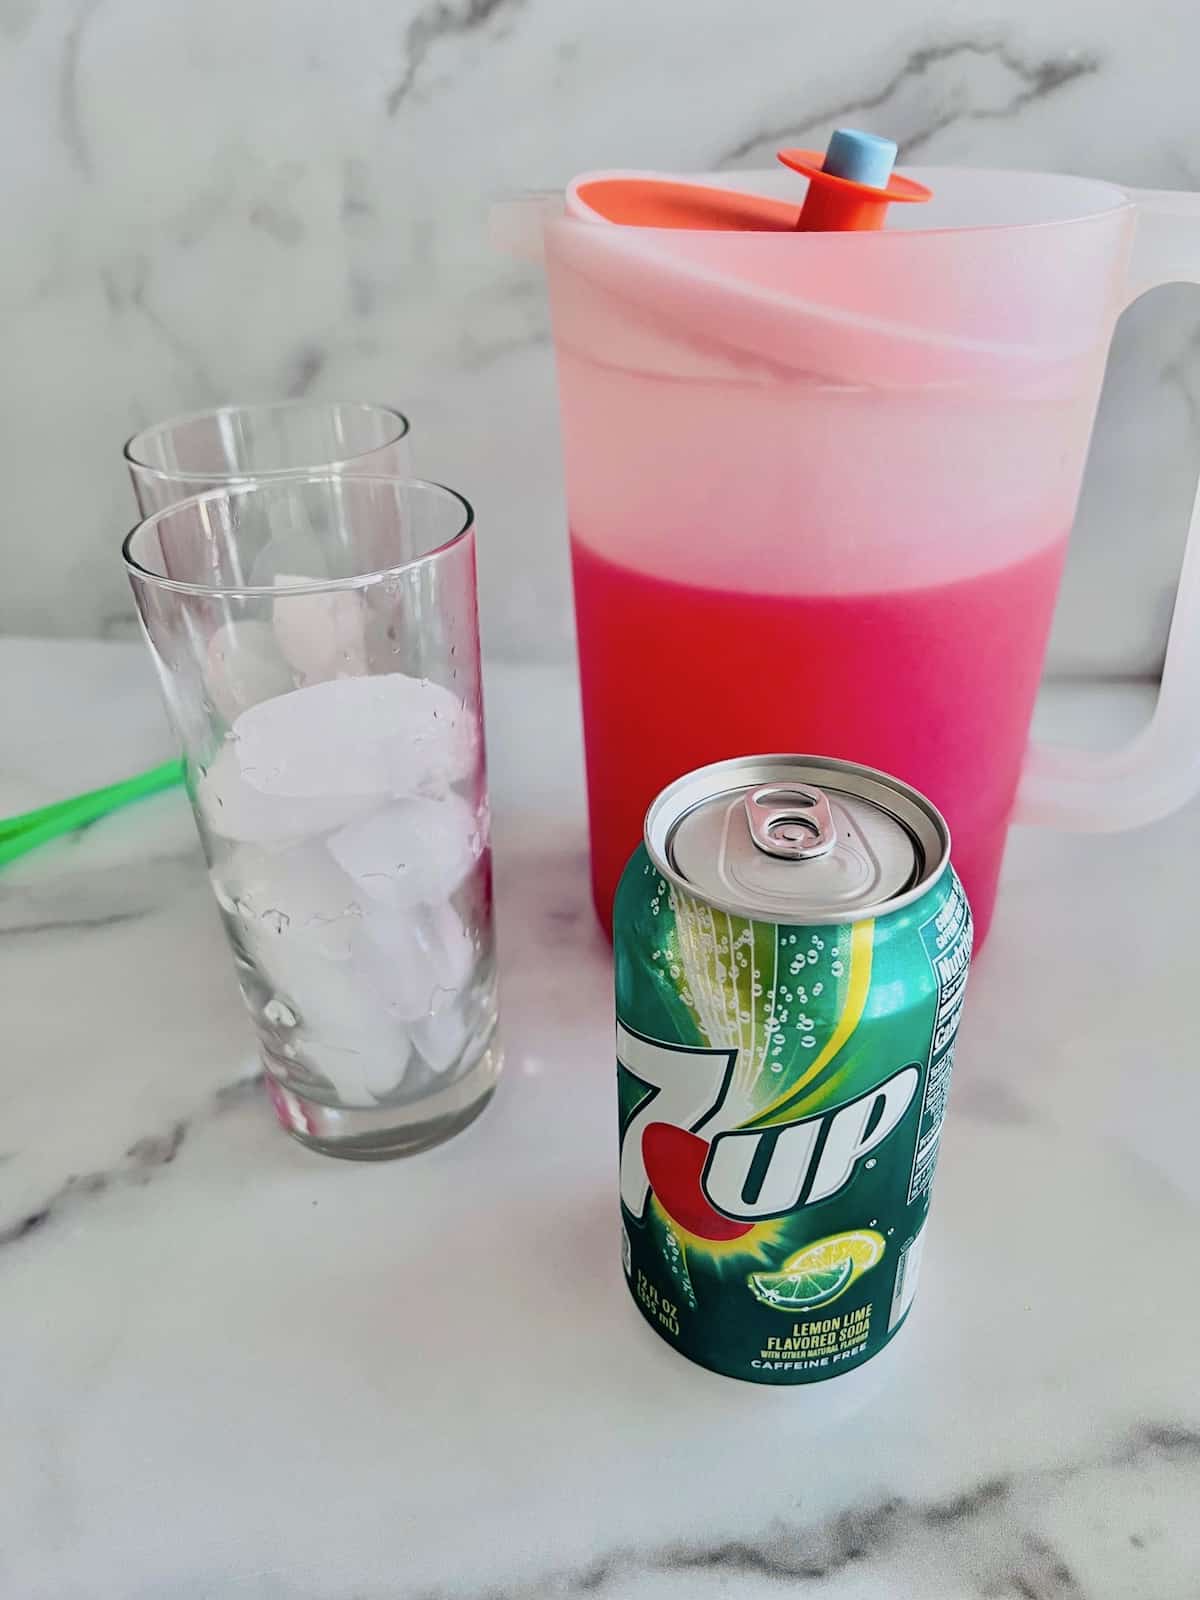 Glasses filled with ice and next to pitcher of punch and a can of 7up.